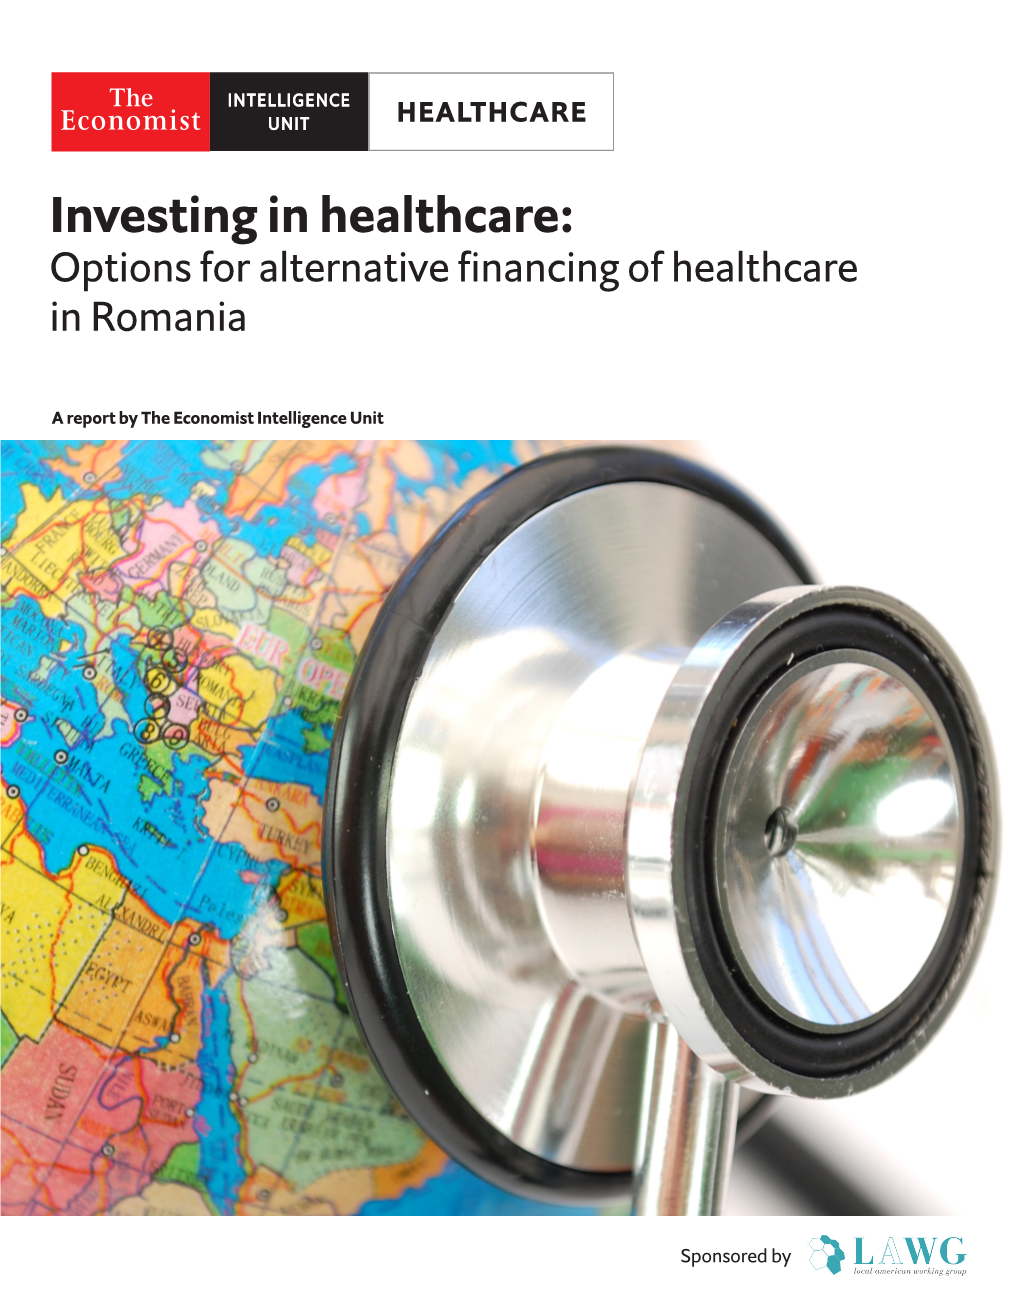 Investing in Healthcare: Options for Alternative Financing of Healthcare in Romania